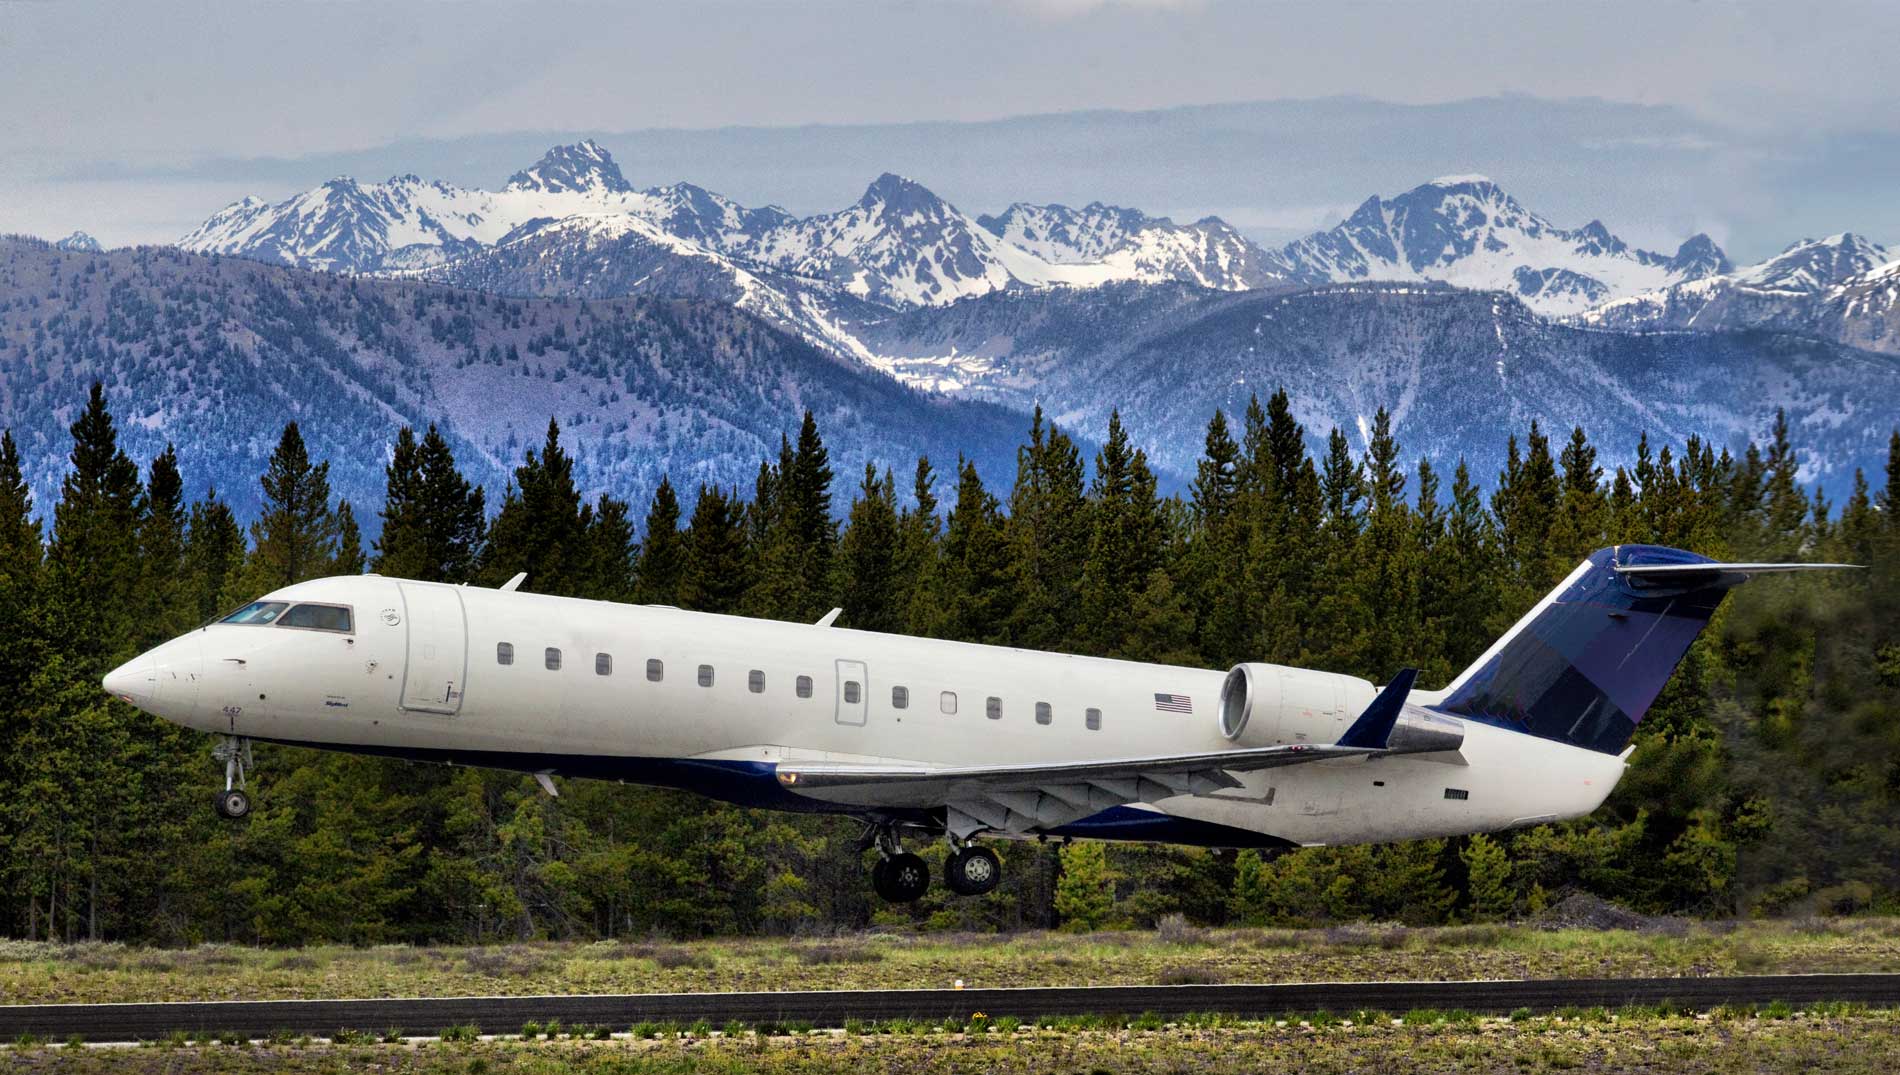 plane landing in front of a backdrop of snow-covered mountains and a forest of treets